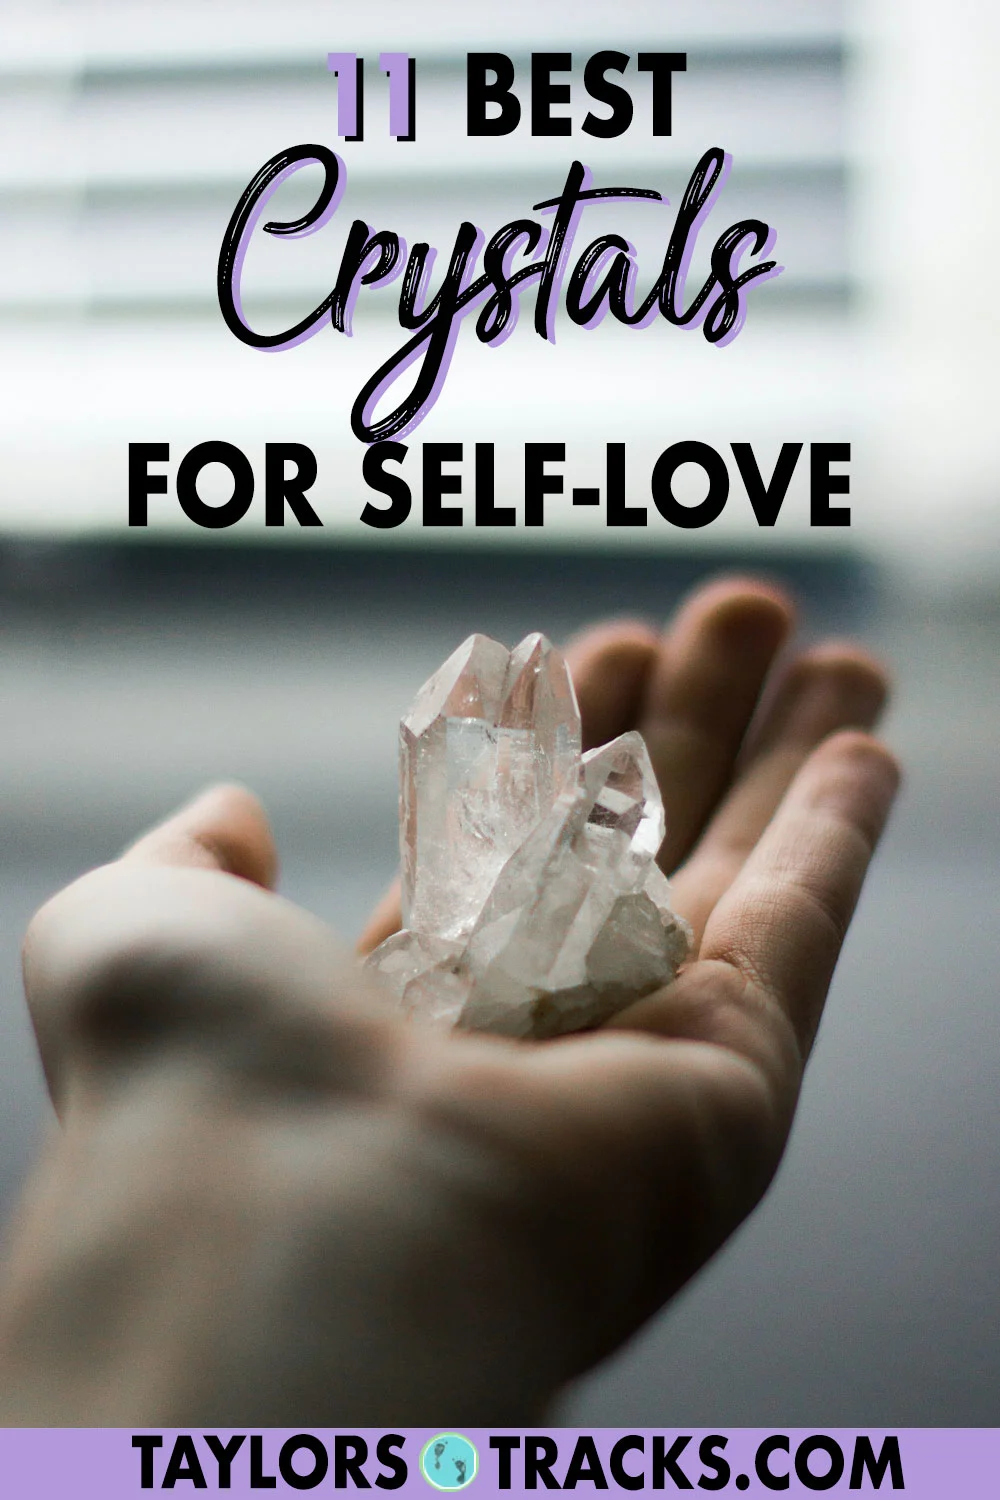 Feeling a lack of love for yourself and feel like you’ve tried everything? Why not try a boost in self-love with these crystals for self-love? Click to find out which crystals are perfect for you.